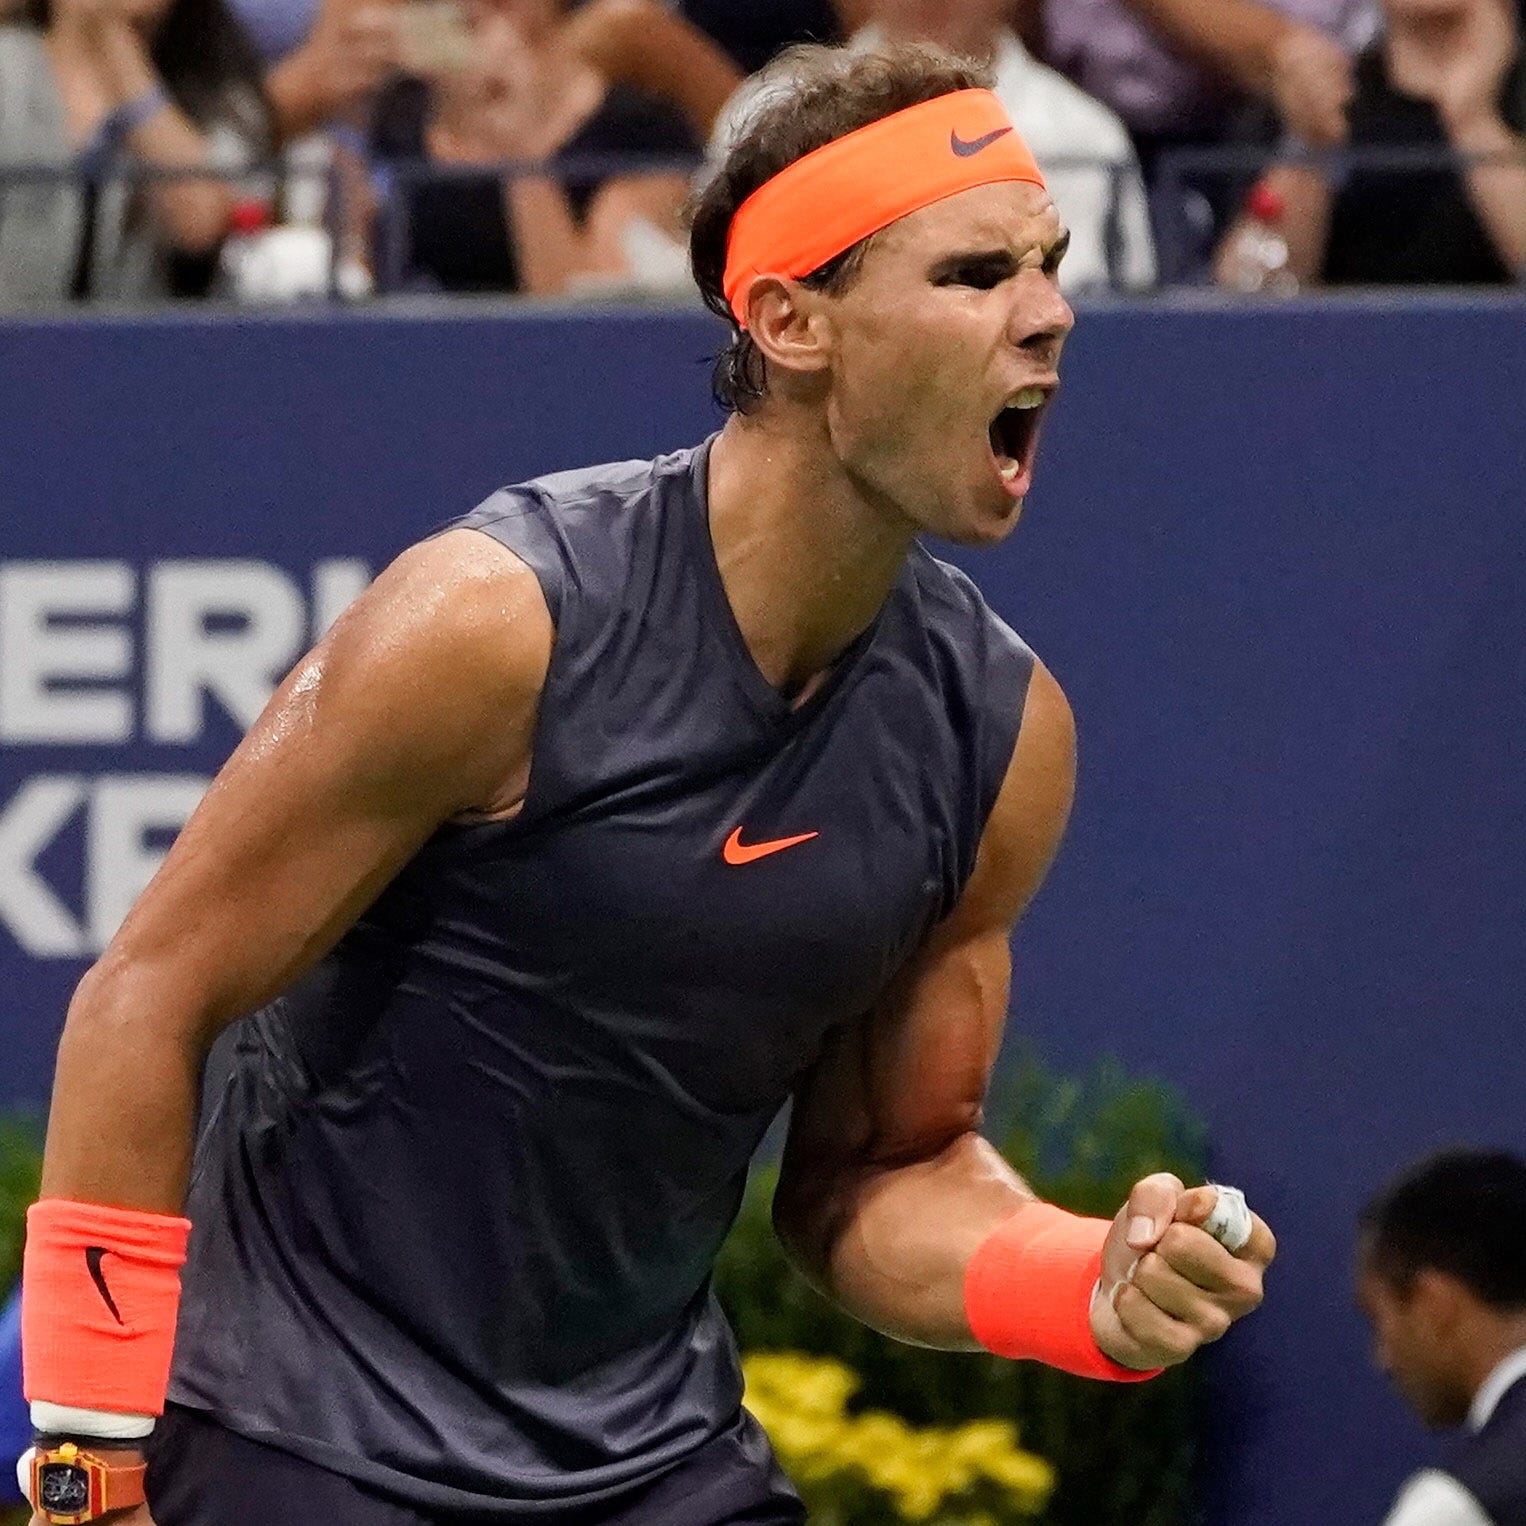 Rafael Nadal reacts after winning the second set against Dominic Thiem.